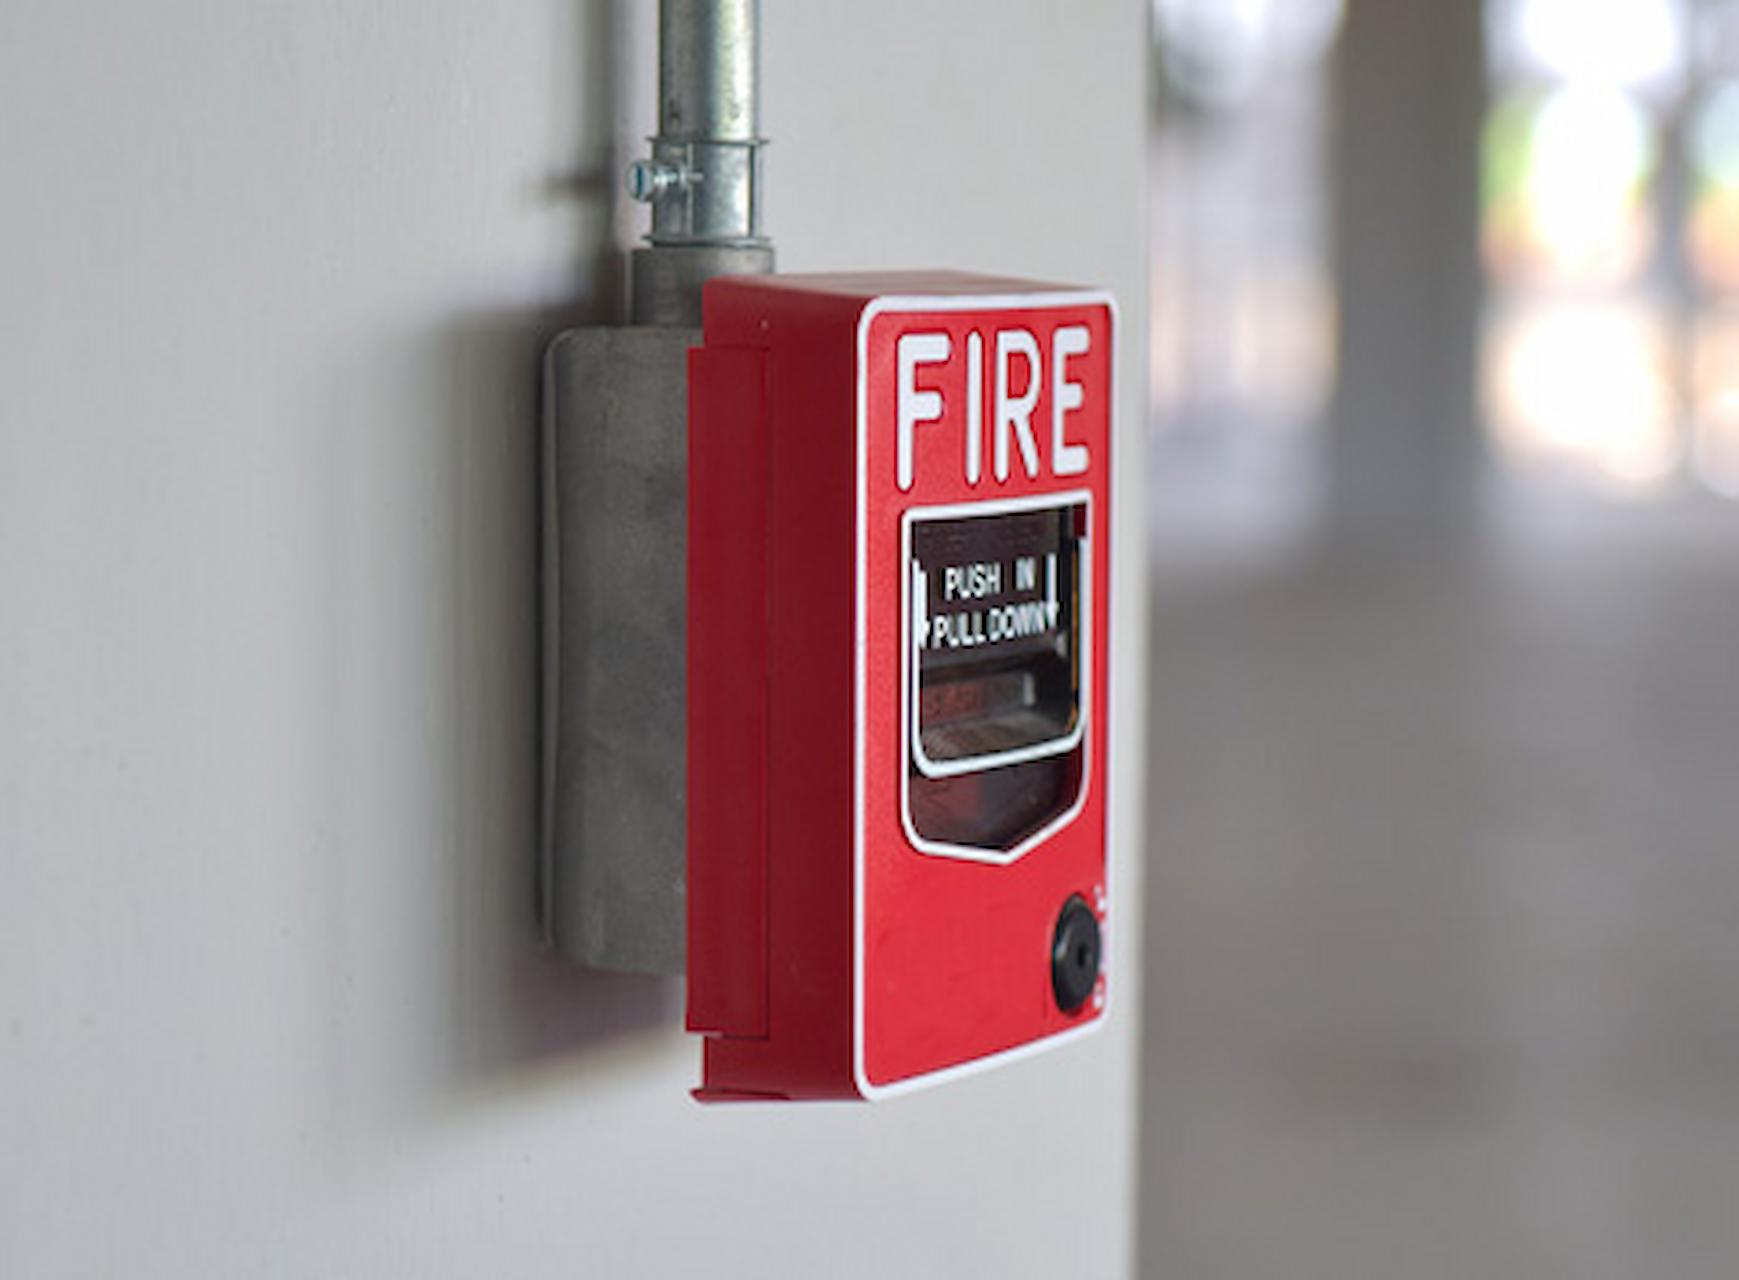 What Are The Important Measures For Fire Protection?